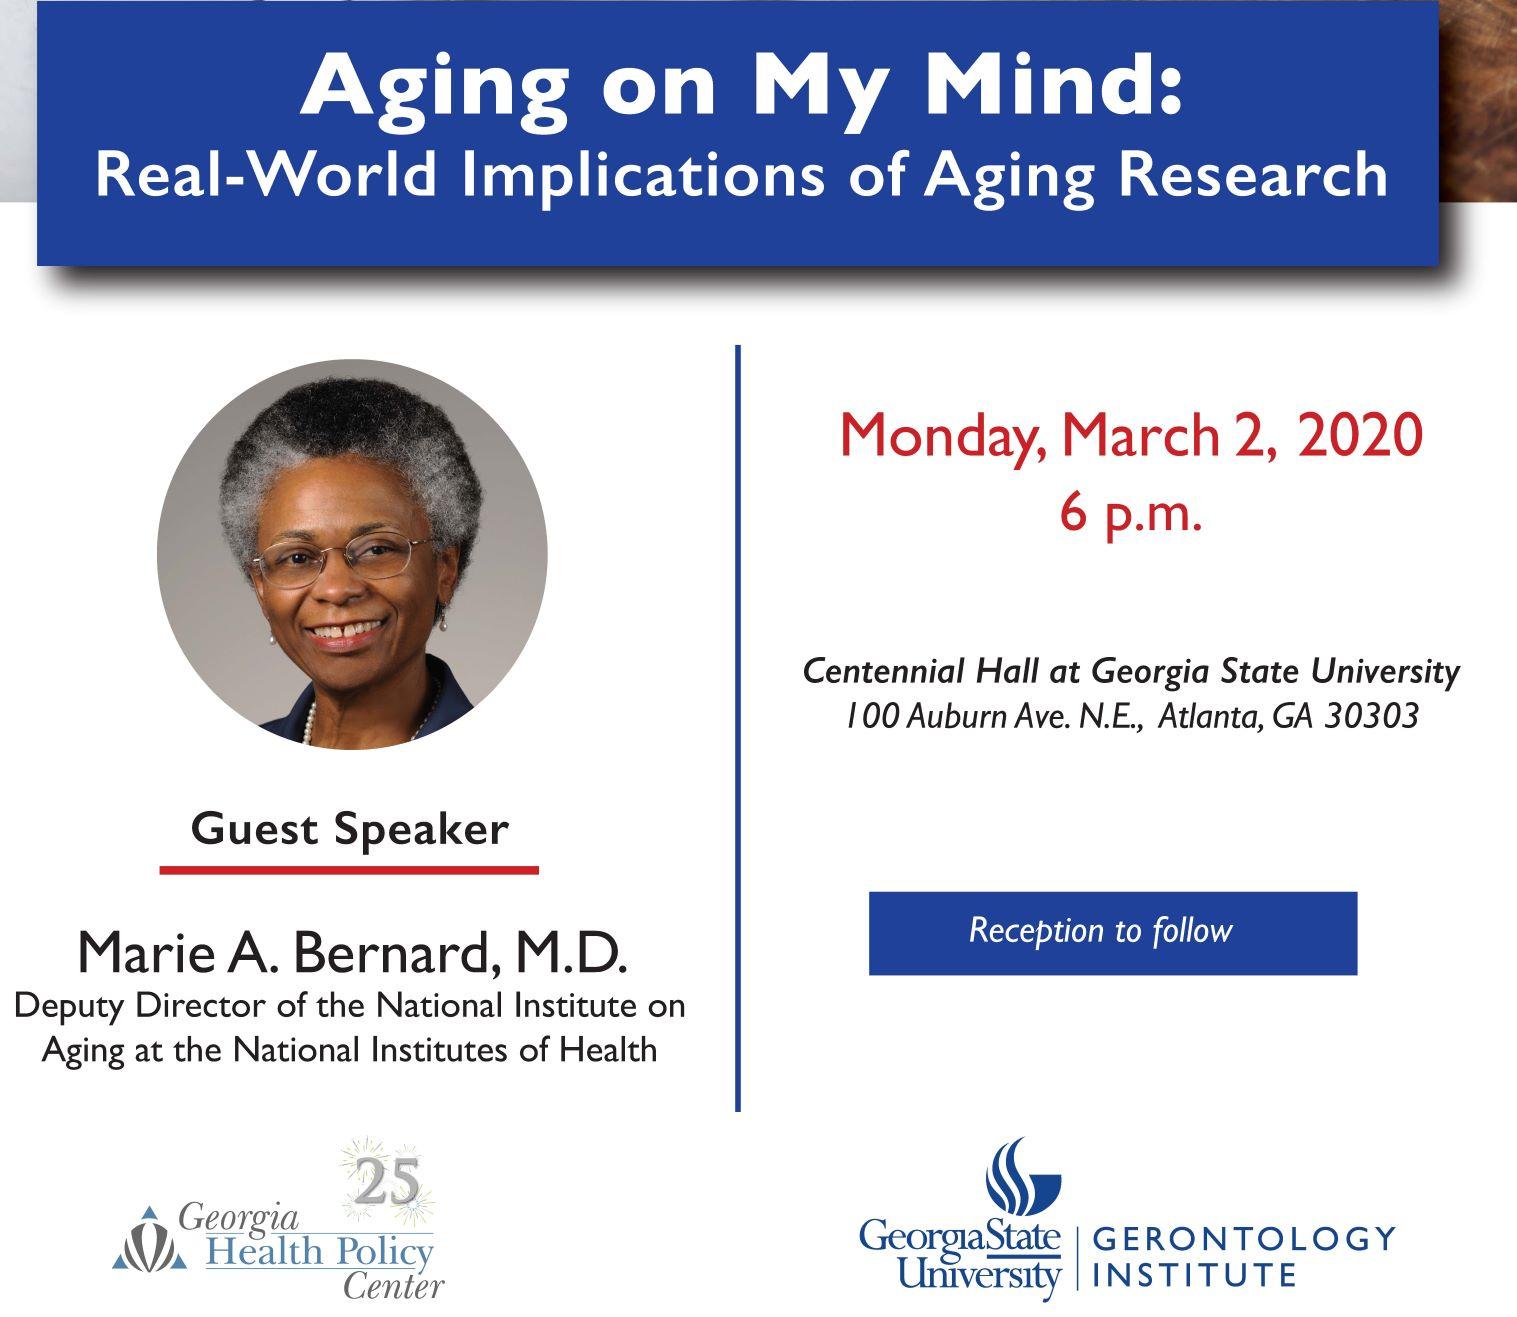 Aging on My Mind: Real-World Implications of Aging Research